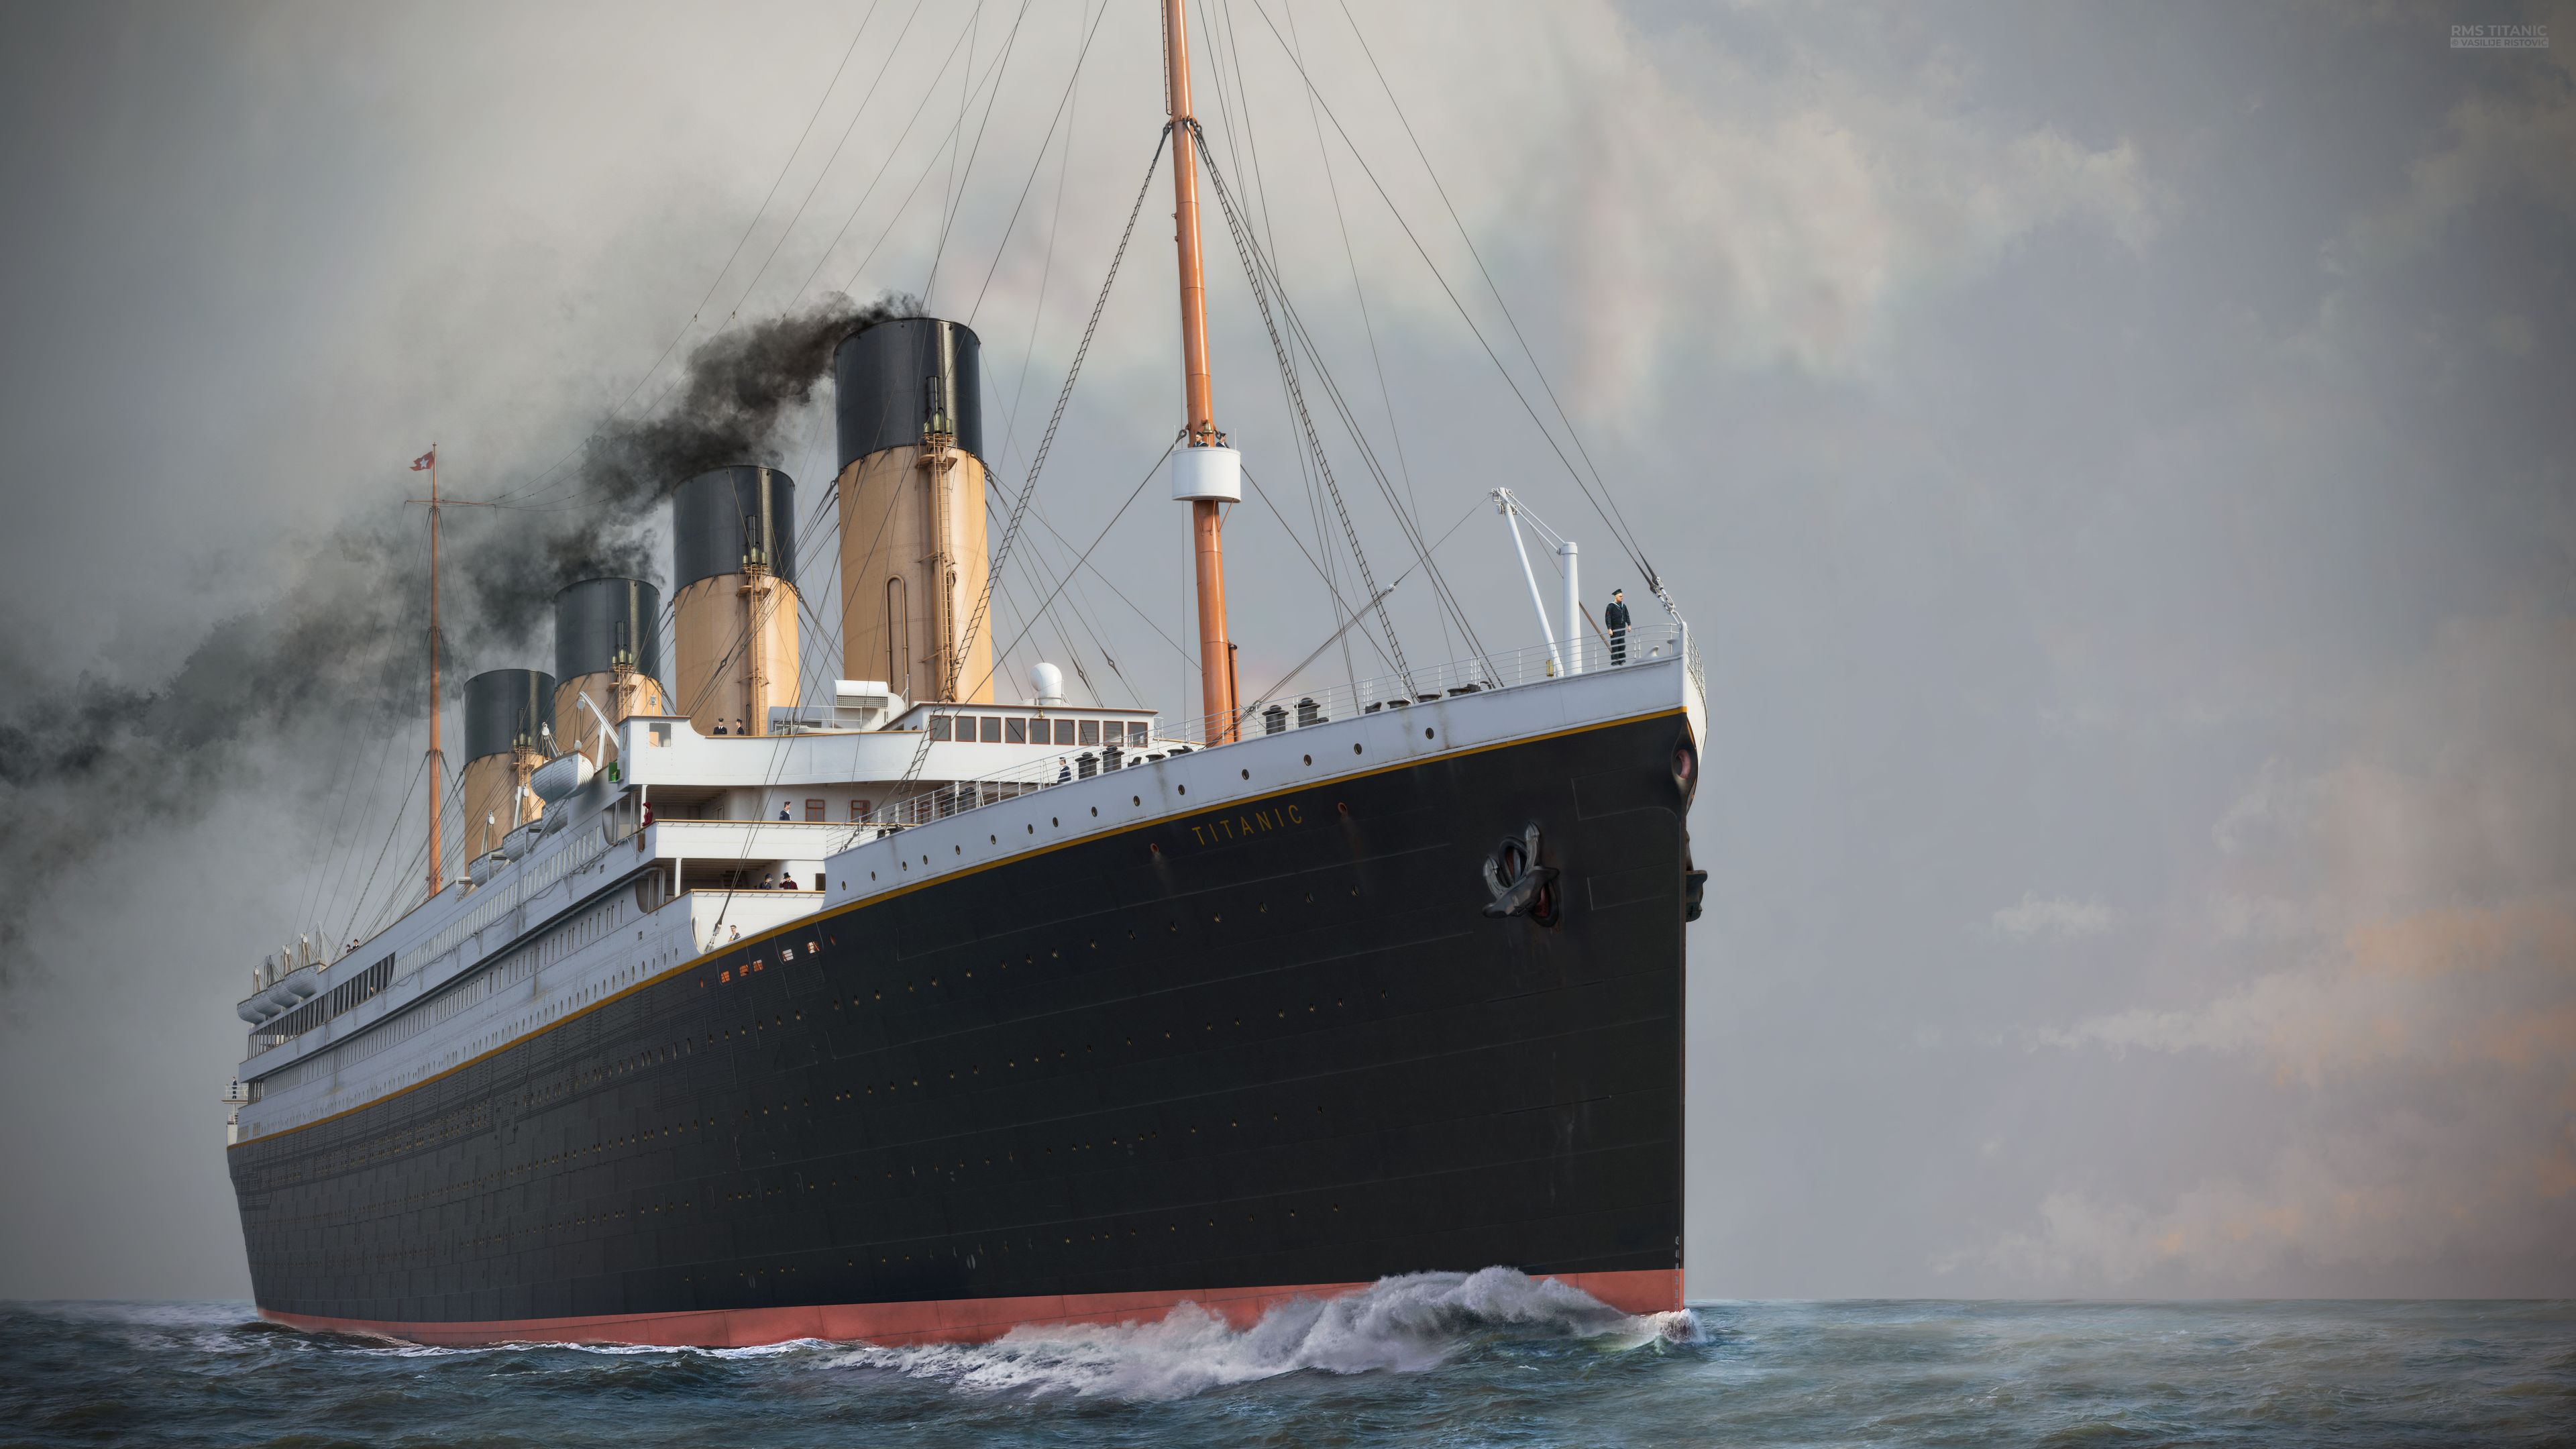 K widescreen wallpaper that i made from my favourite render of titanic i havent posted anything new for long time and though you guys would appreciate something like this rtitanic